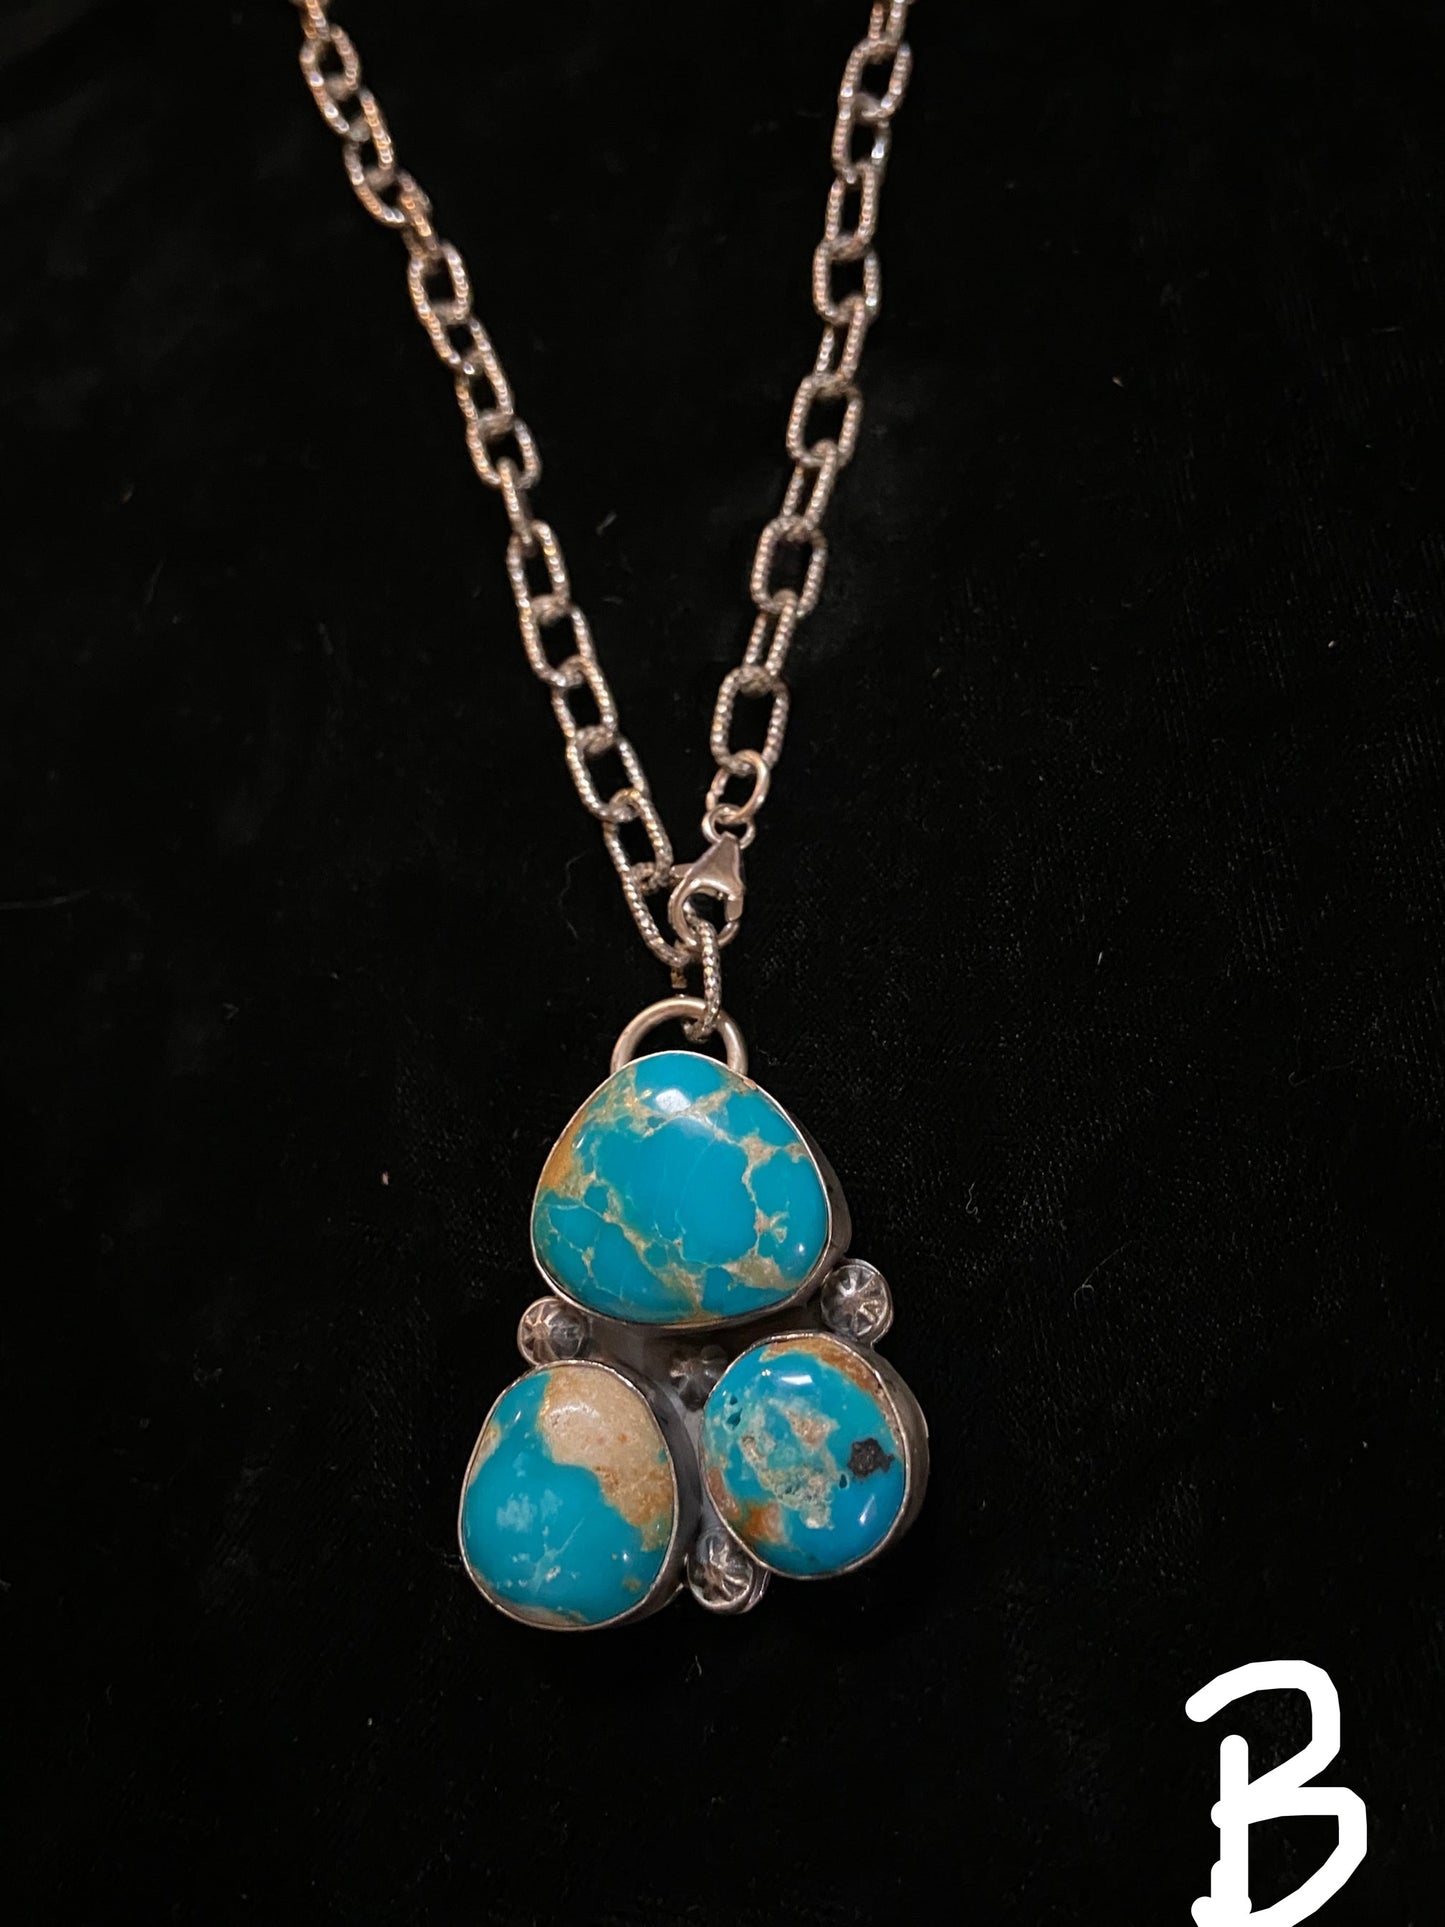 White Water Turquoise Lariat Necklace